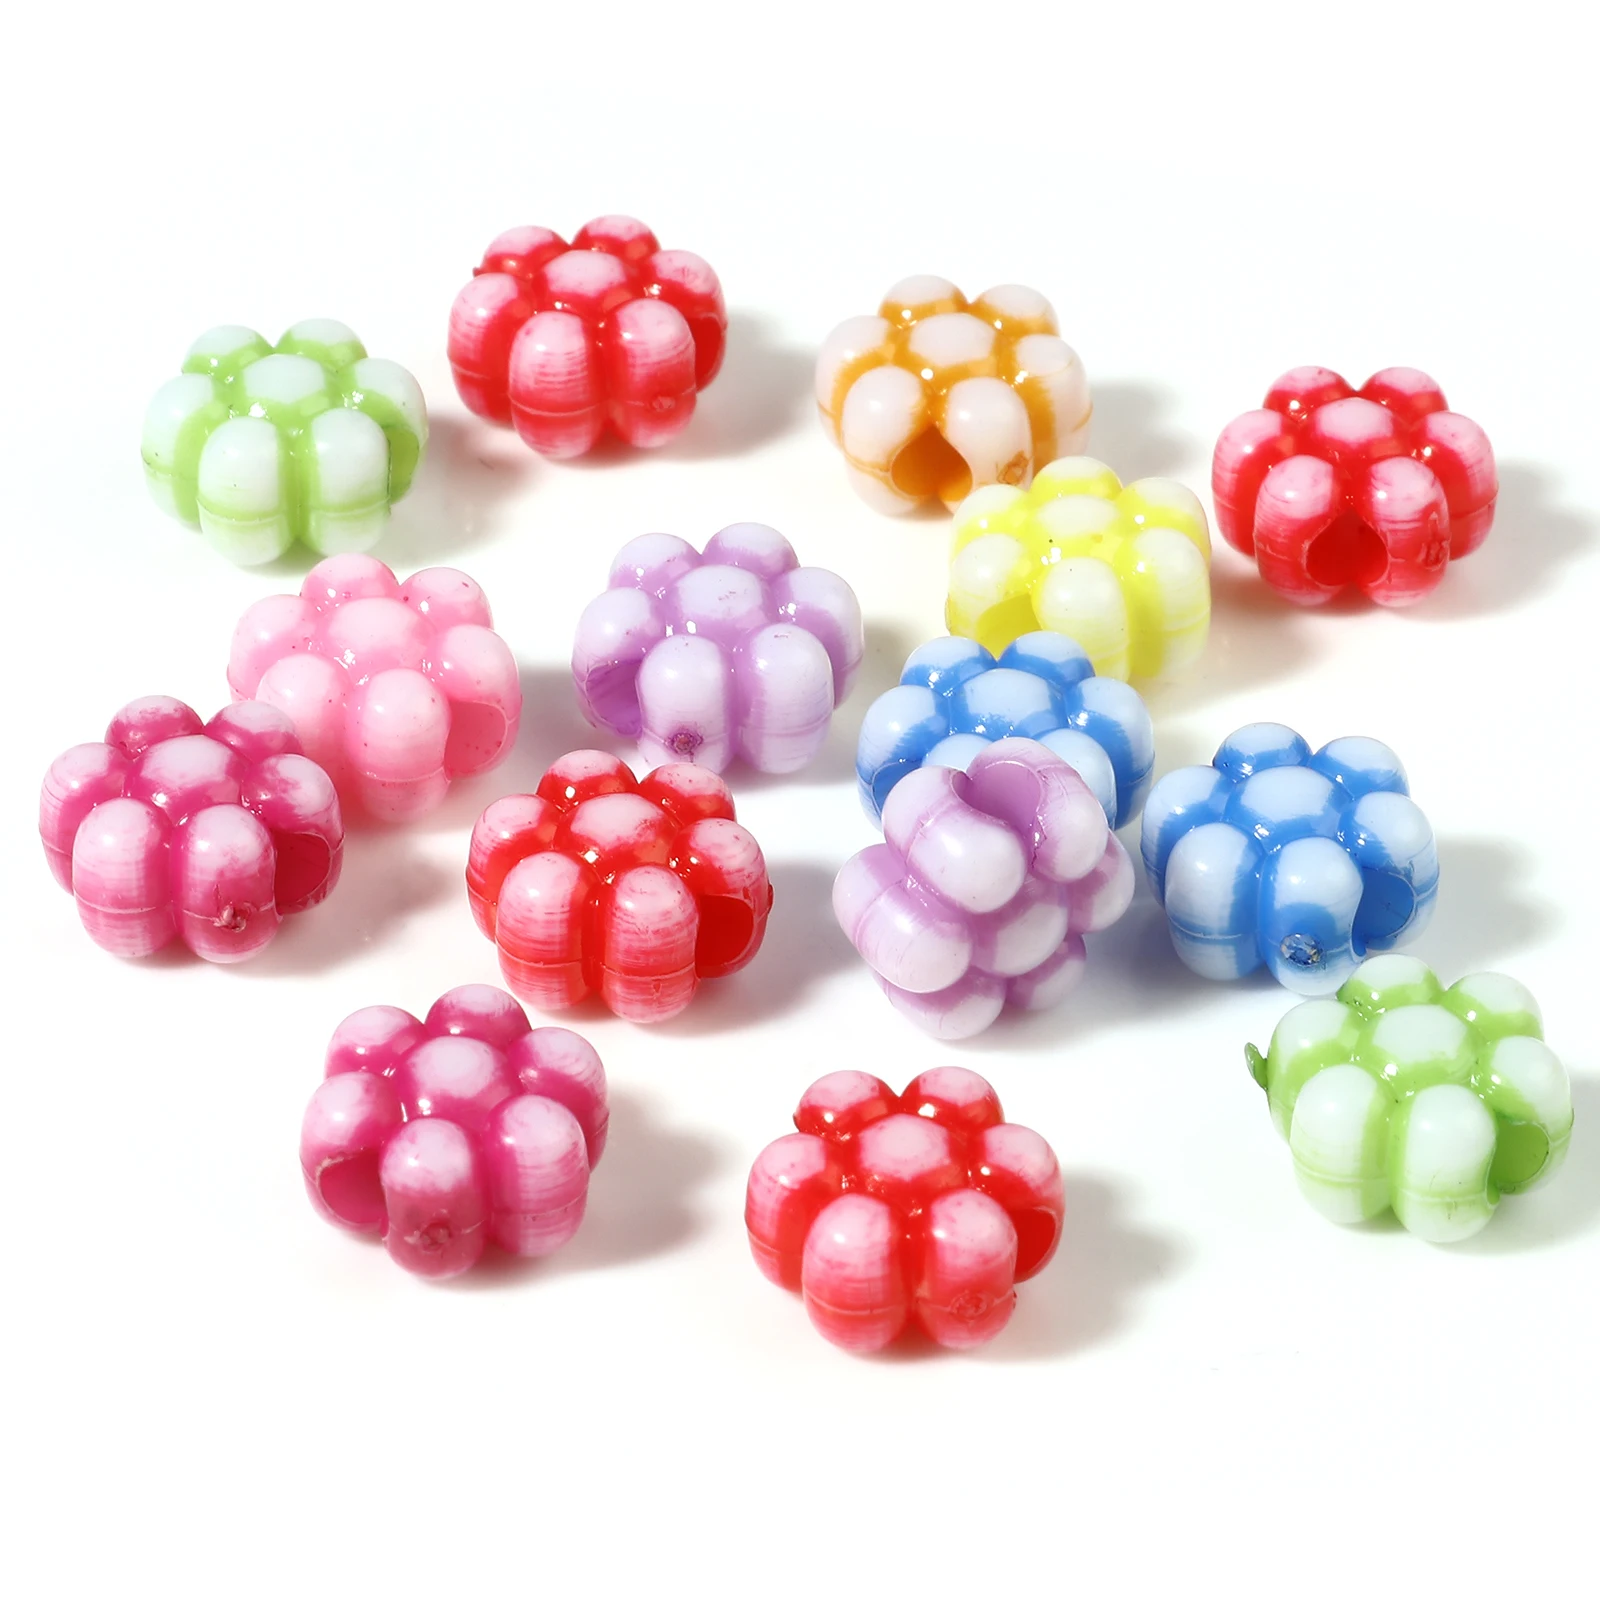 

Acrylic Beads Flower At Random Color Sweet Loose Spacer Beads DIY Making Bracelets Necklace Jewelry About 12mm x 11mm,300PCs